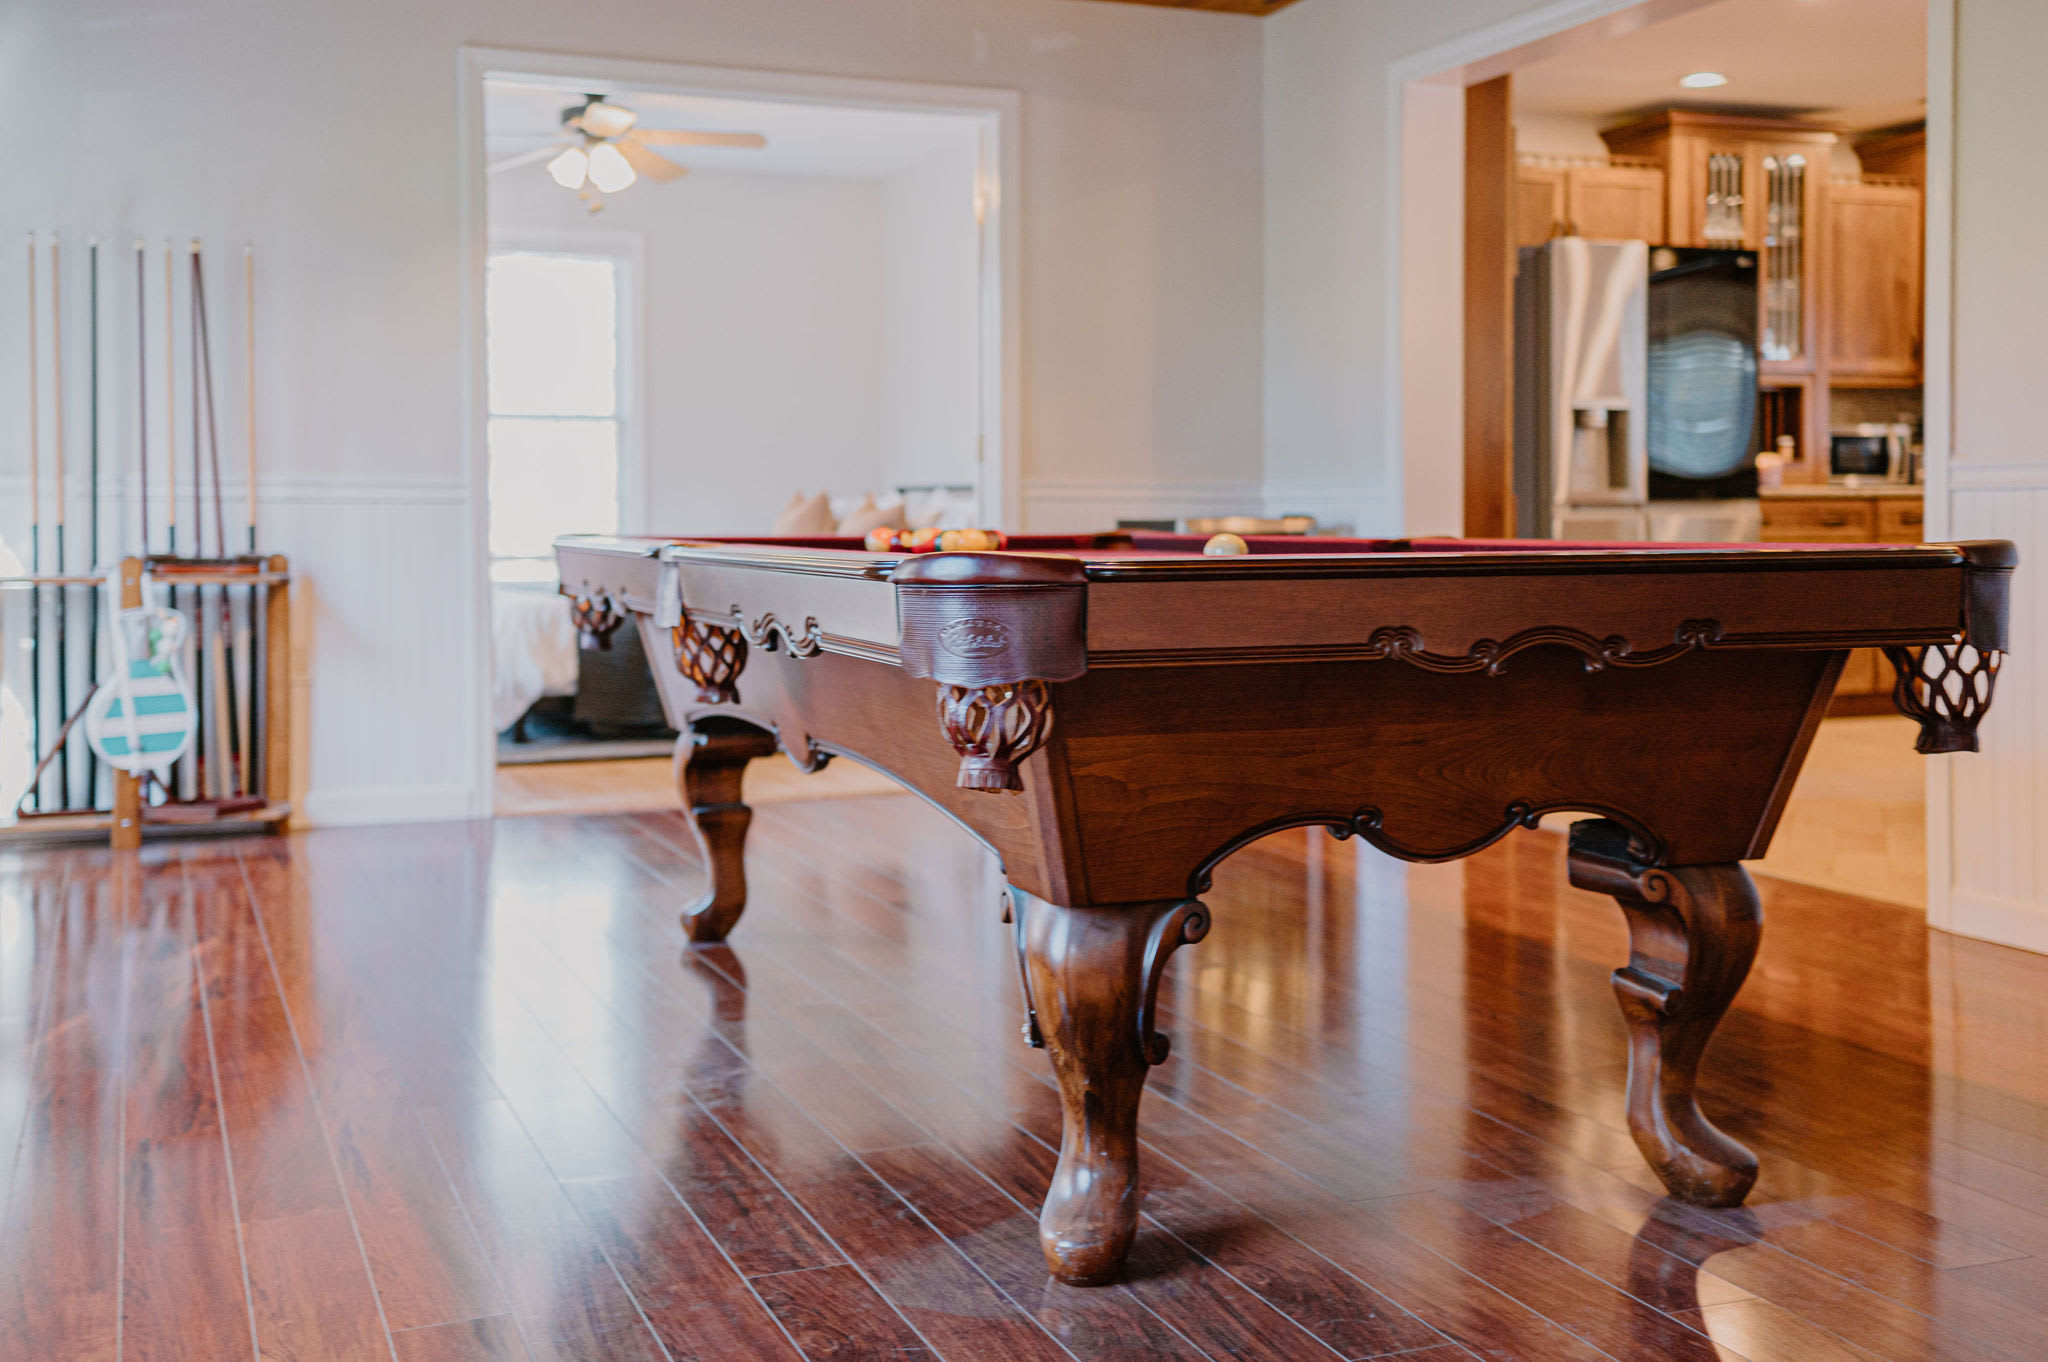 Pool table is right off the kitchen!